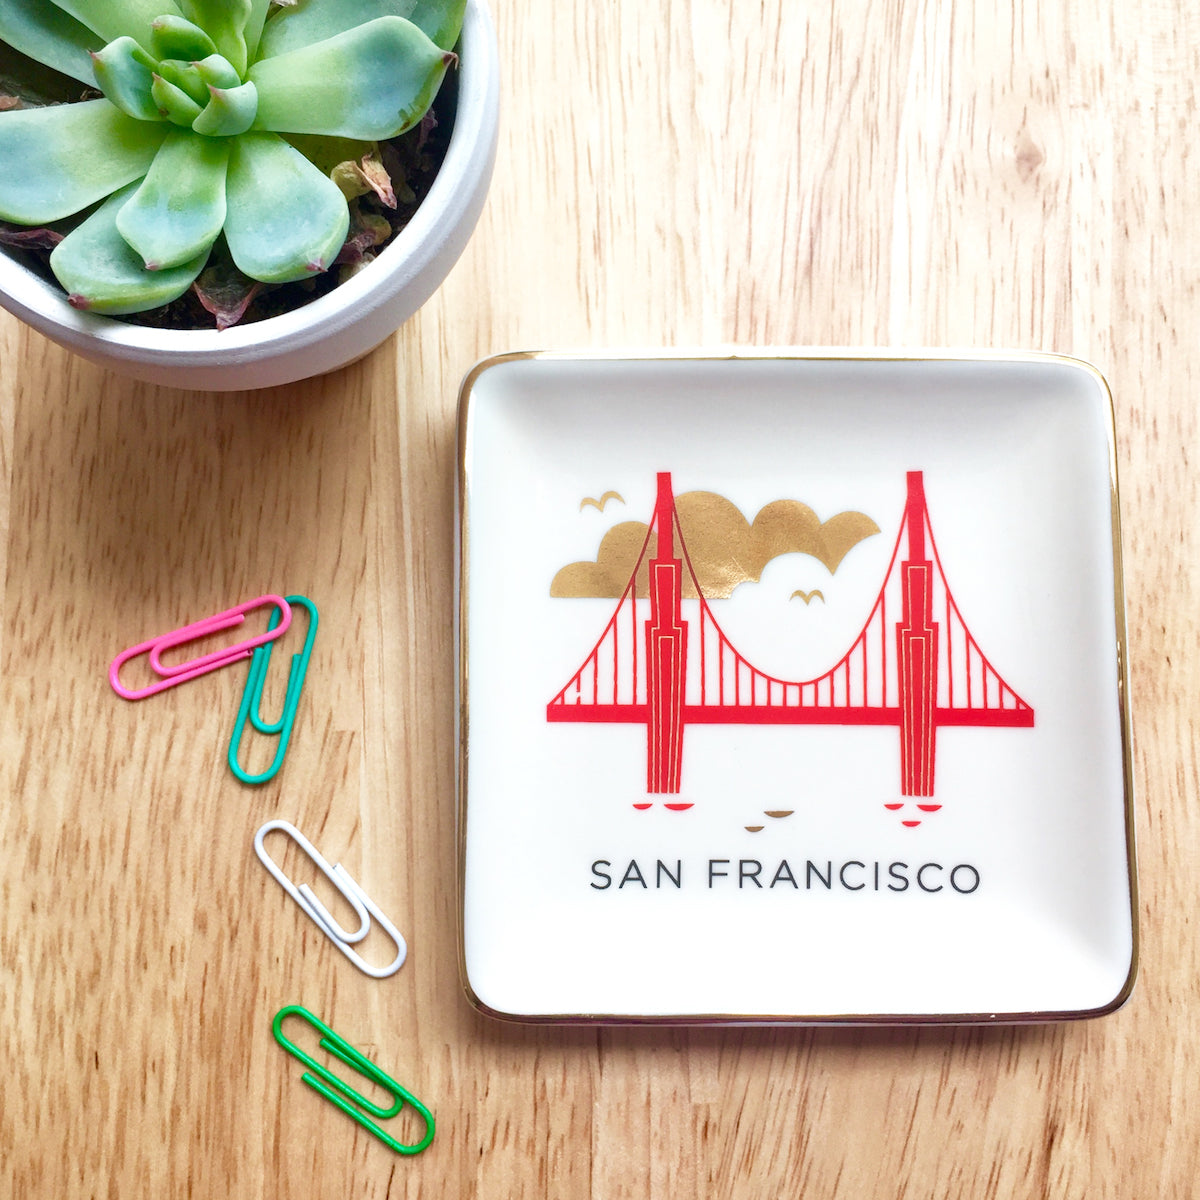 A small succulent, colorful paperclips, and square ceramic dish with a colorful illustration of San Francisco’s Golden Gate Bridge with gold accents sit on a wooden table top.